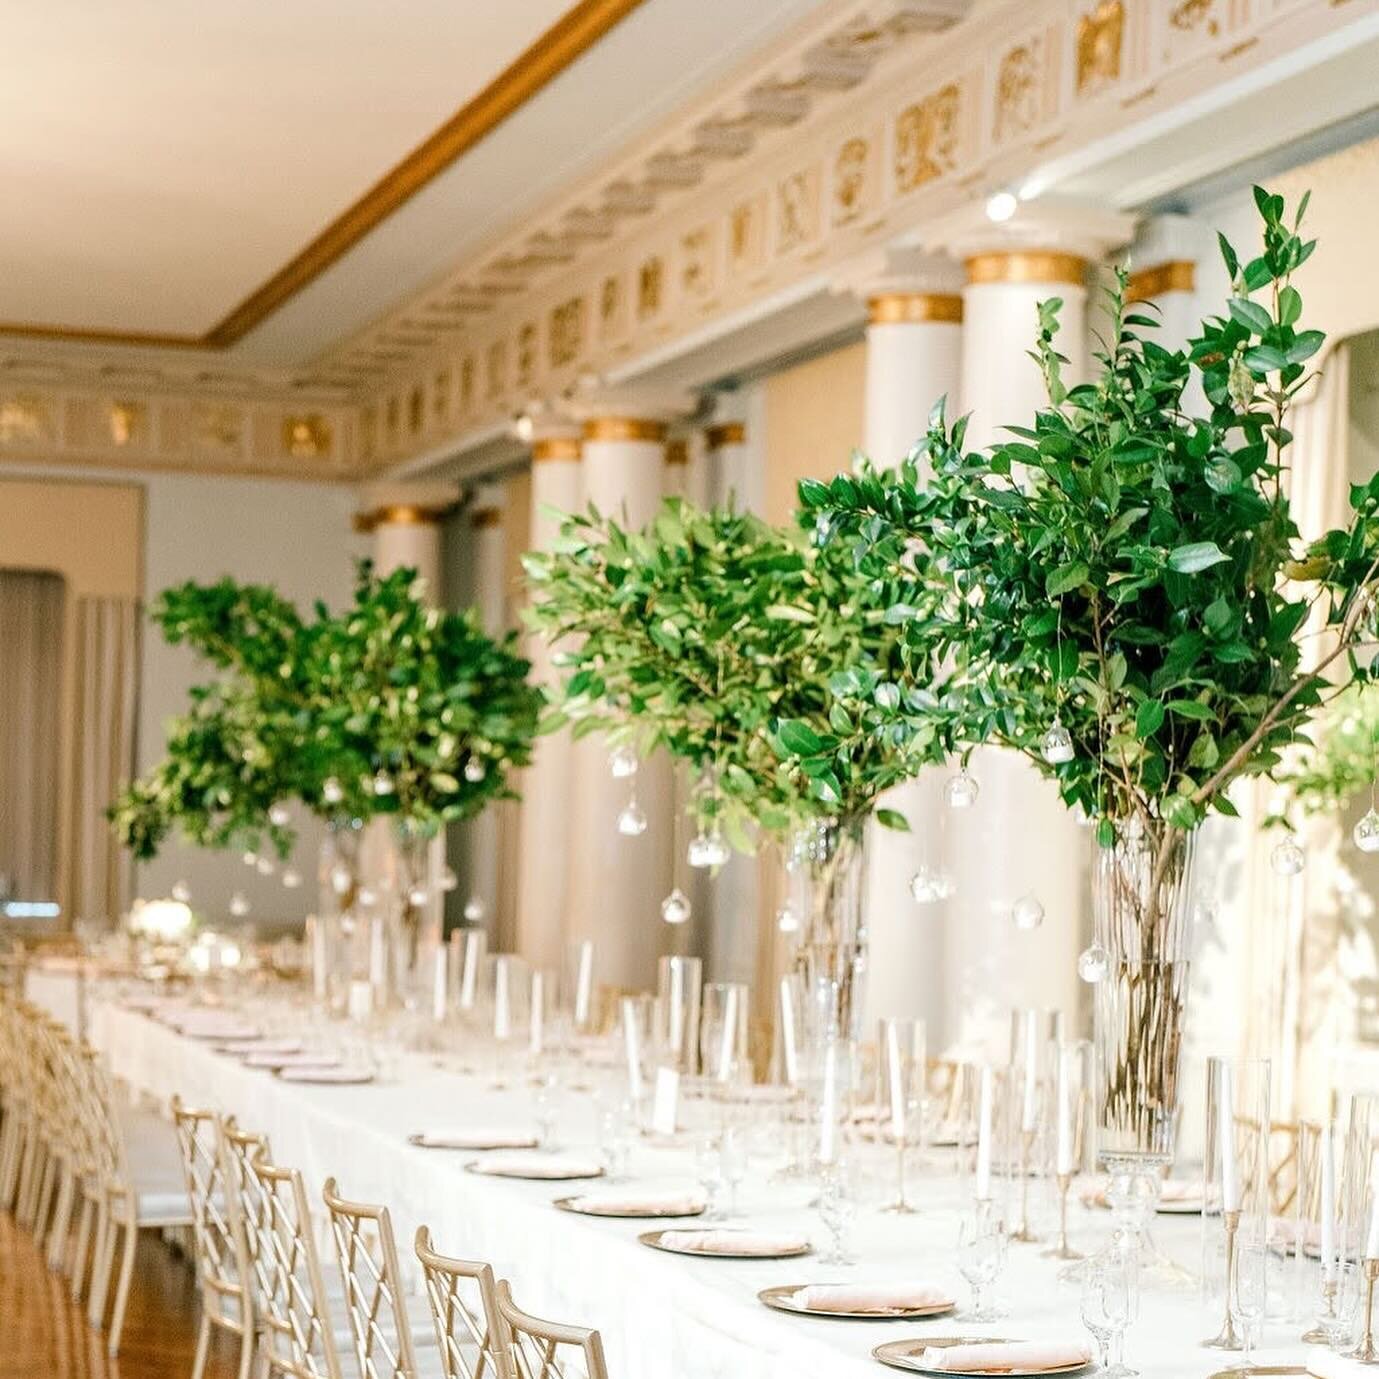 I loved these &ldquo;tree&rdquo; centerpieces for Maddie and Mike&rsquo;s December wedding. We wanted to appropriately compliment the season without veering into Christmas territory. The camellia branches were the perfect foliage and the hanging voti